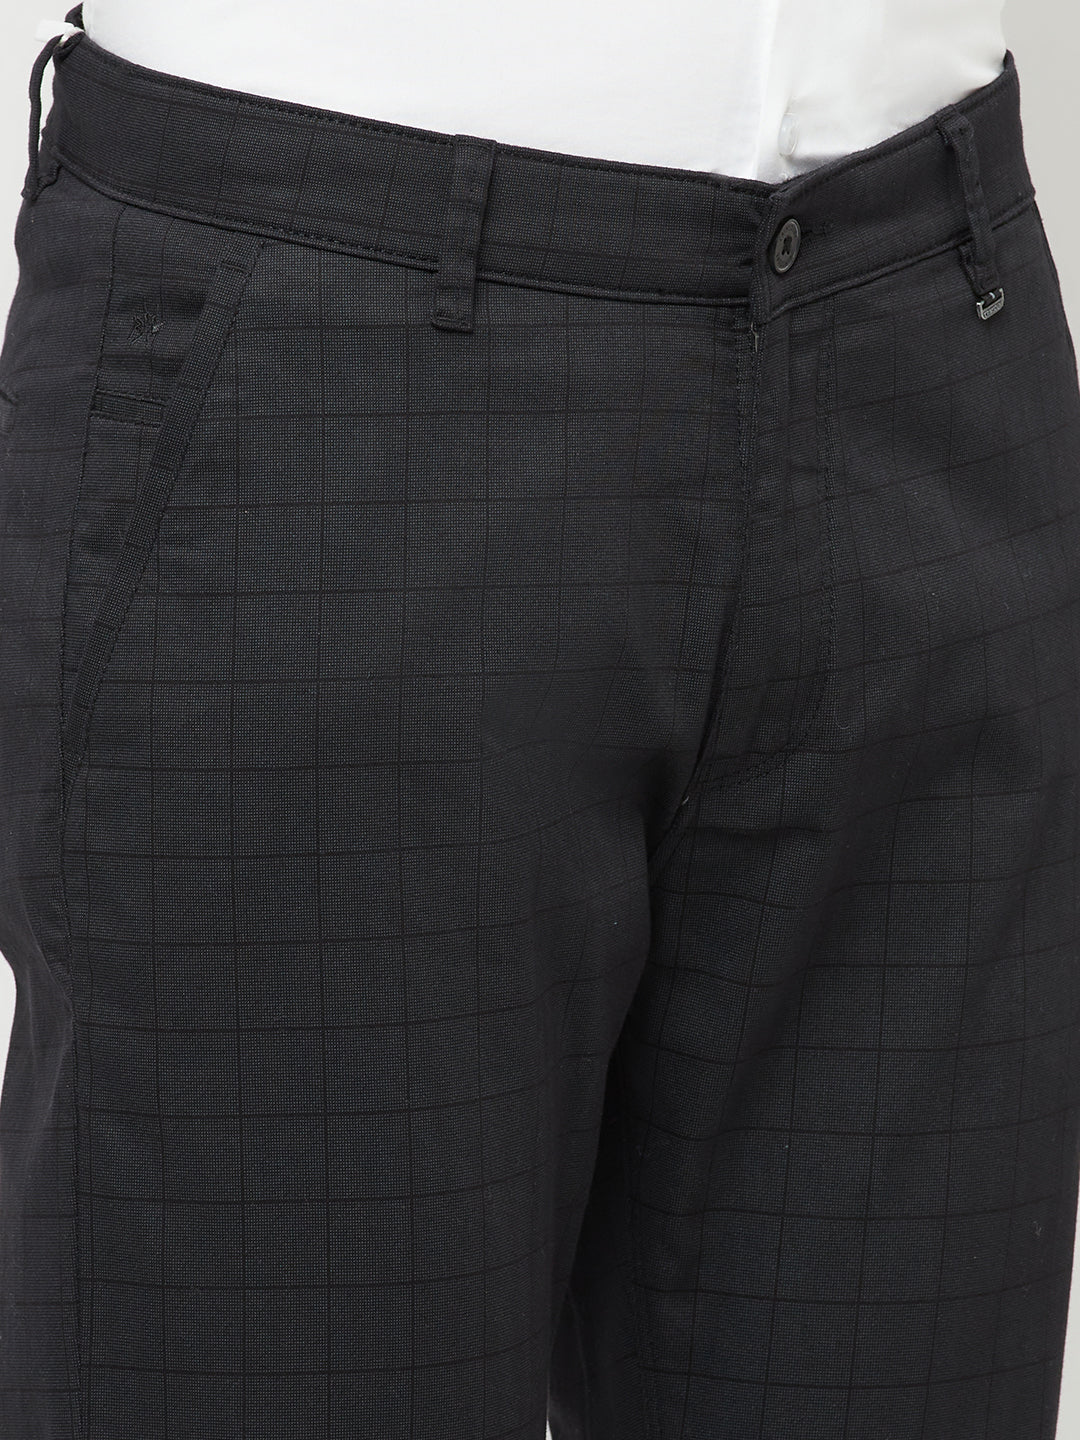 Black Checked Trousers - Men Trousers